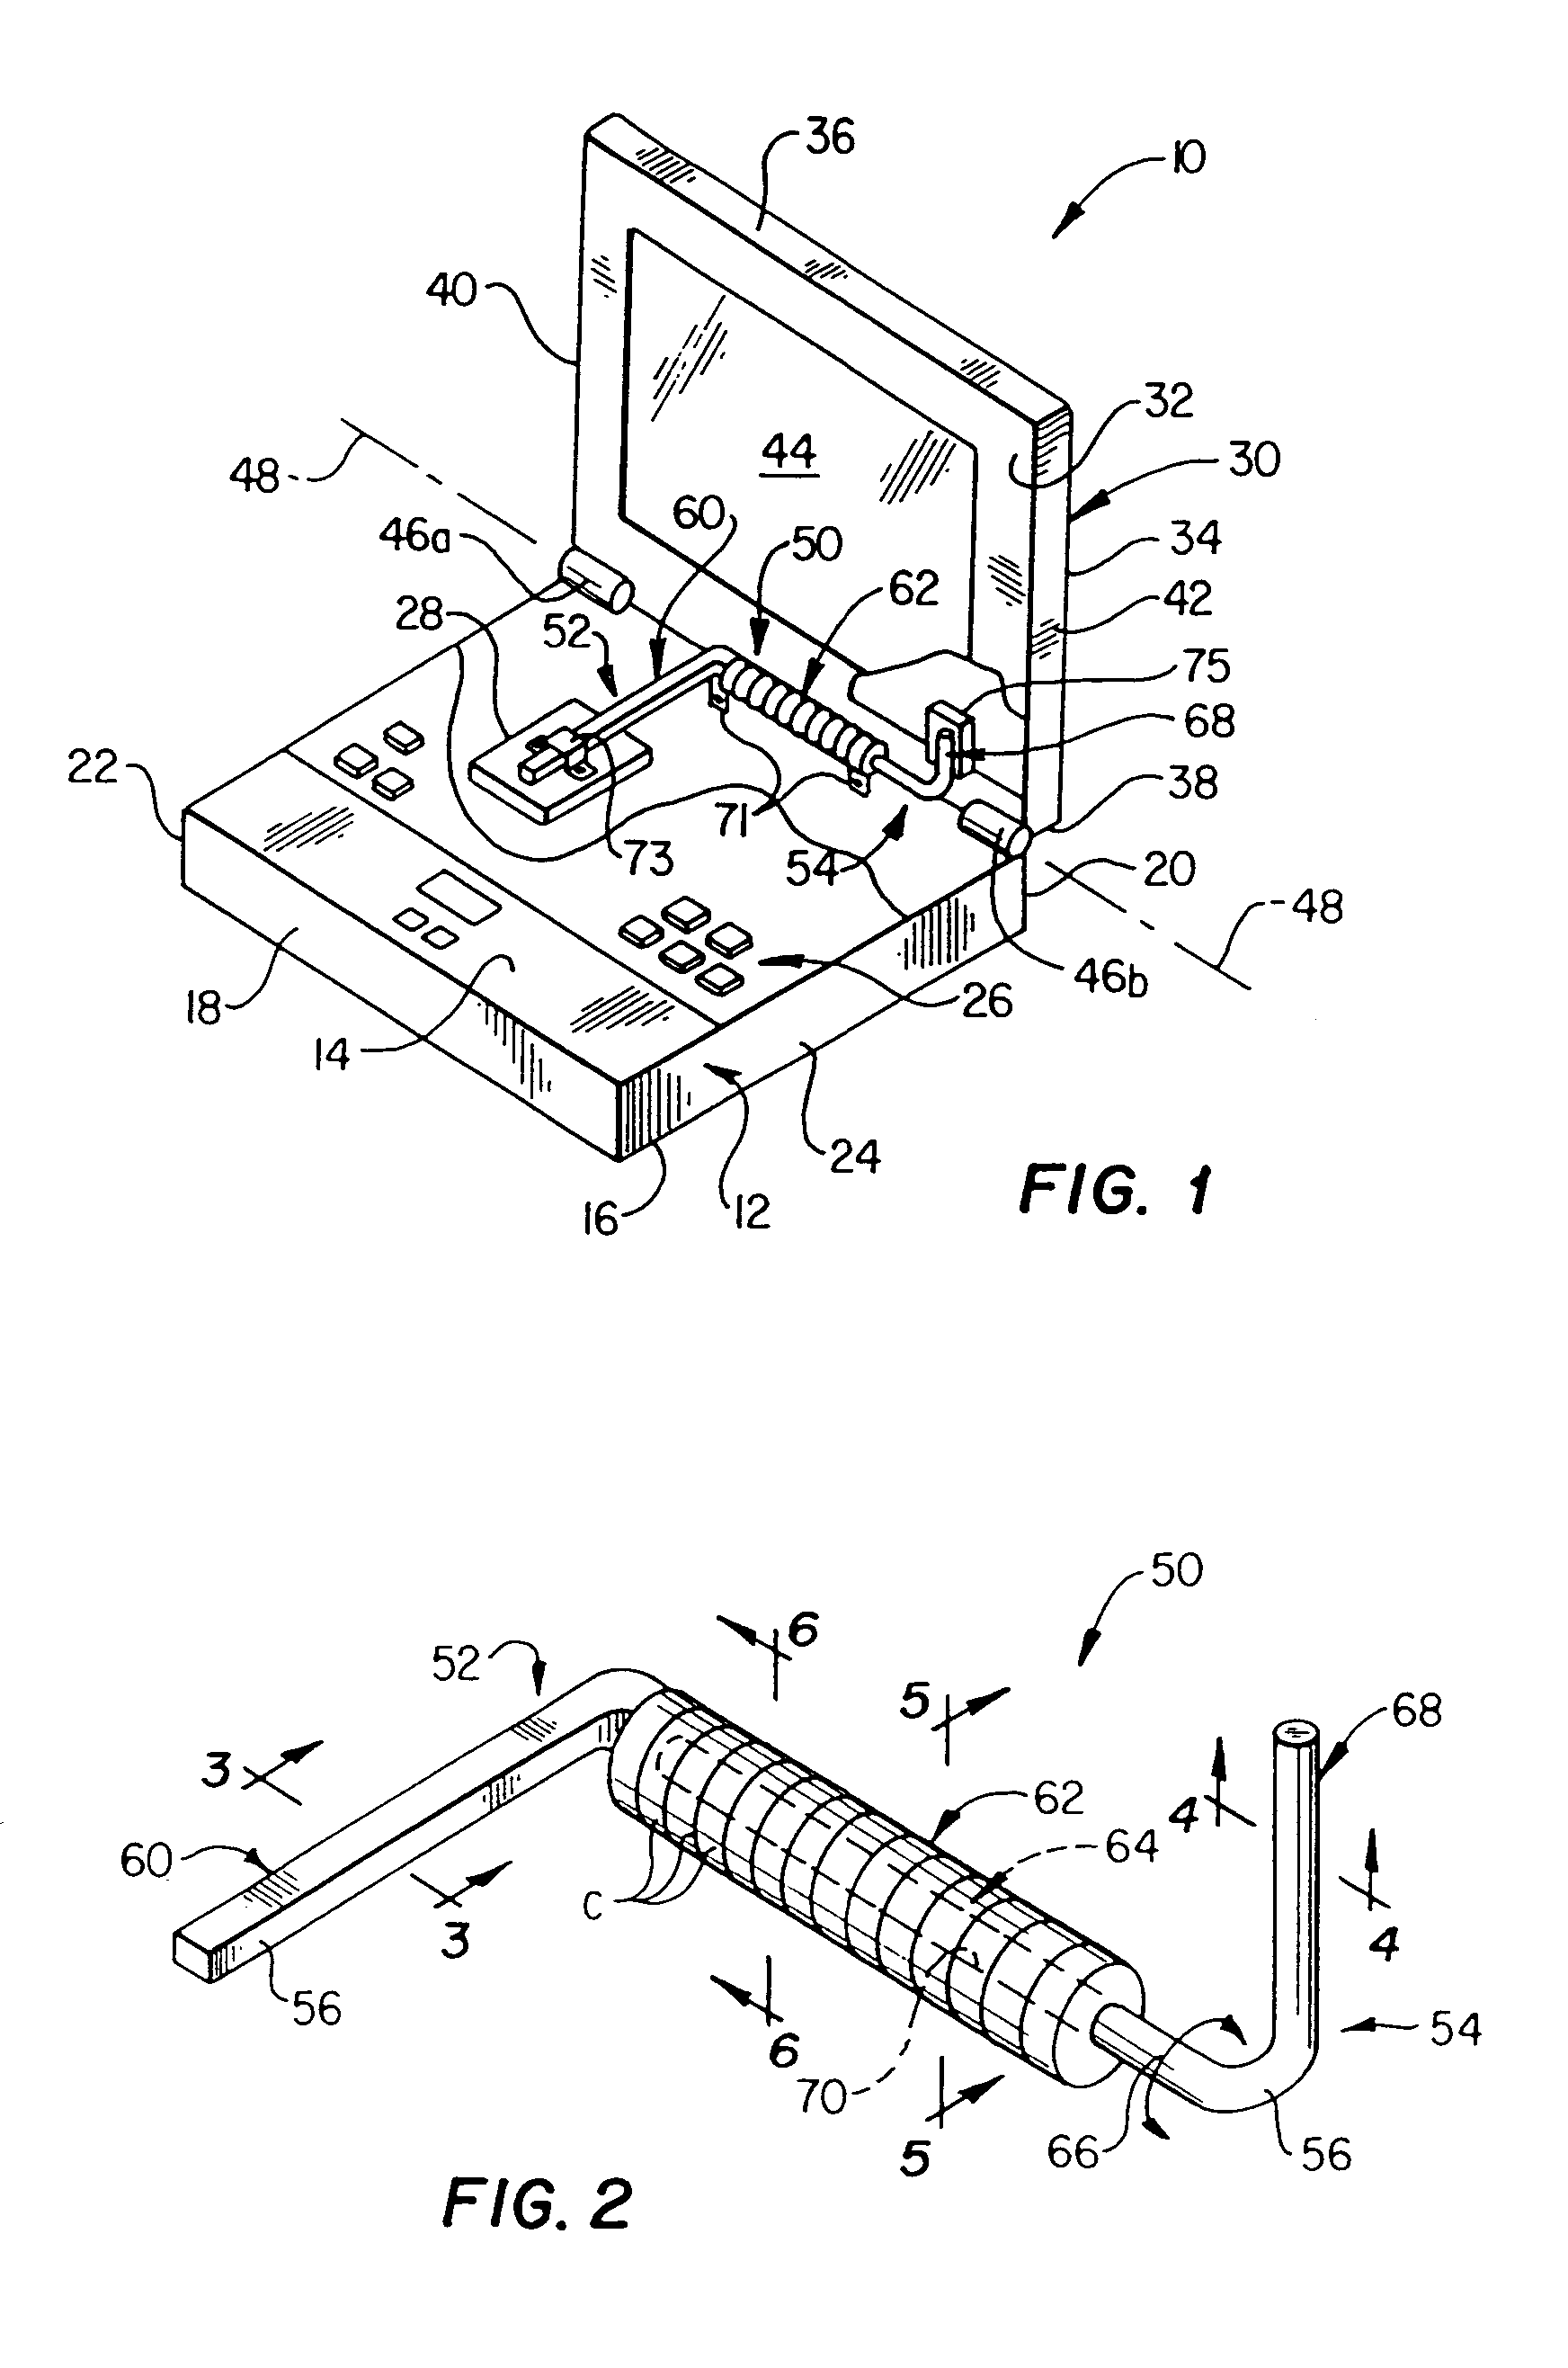 Flexible heat pipe structure and associated methods for dissipating heat in electronic apparatus